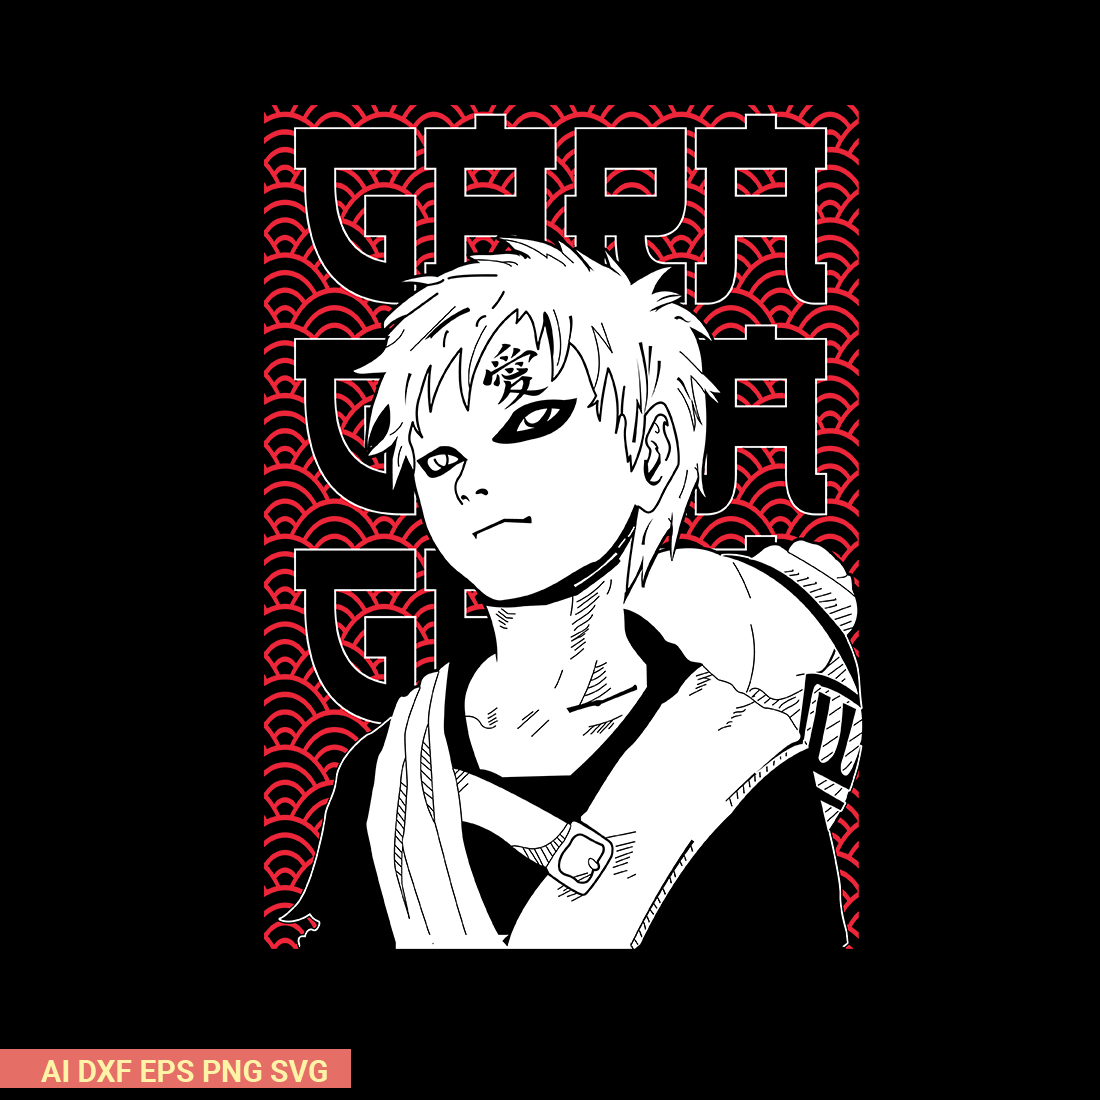 Naruto Characters tshirt design and poster design cover image.